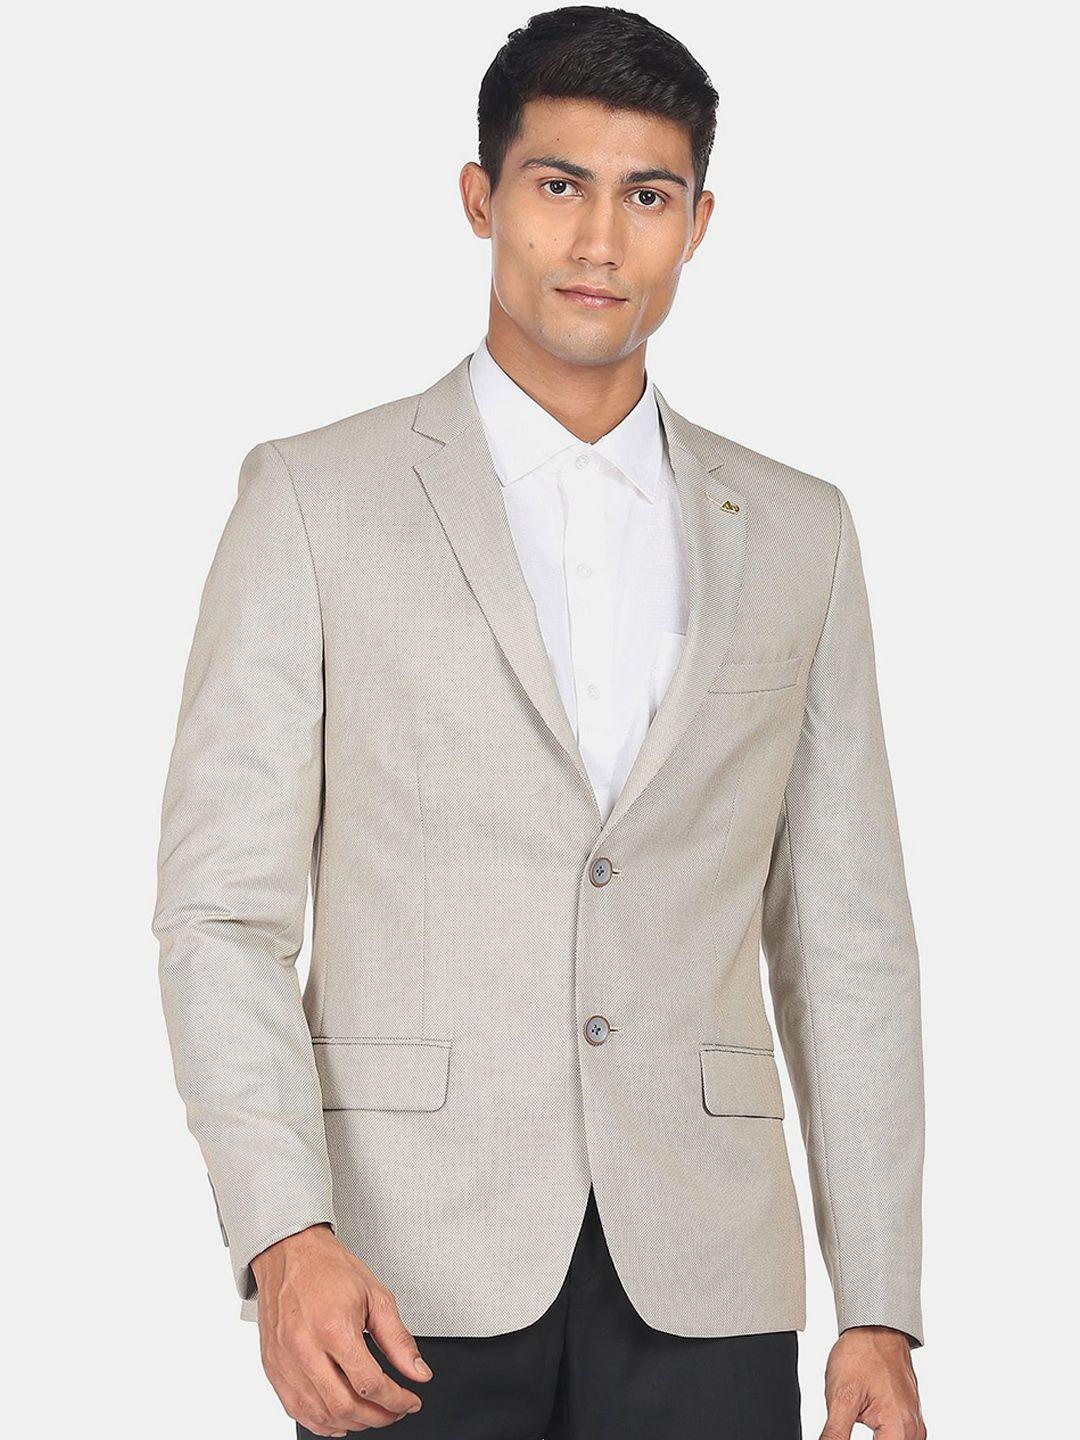 ad by arvind men tailored-fit single breasted blazers